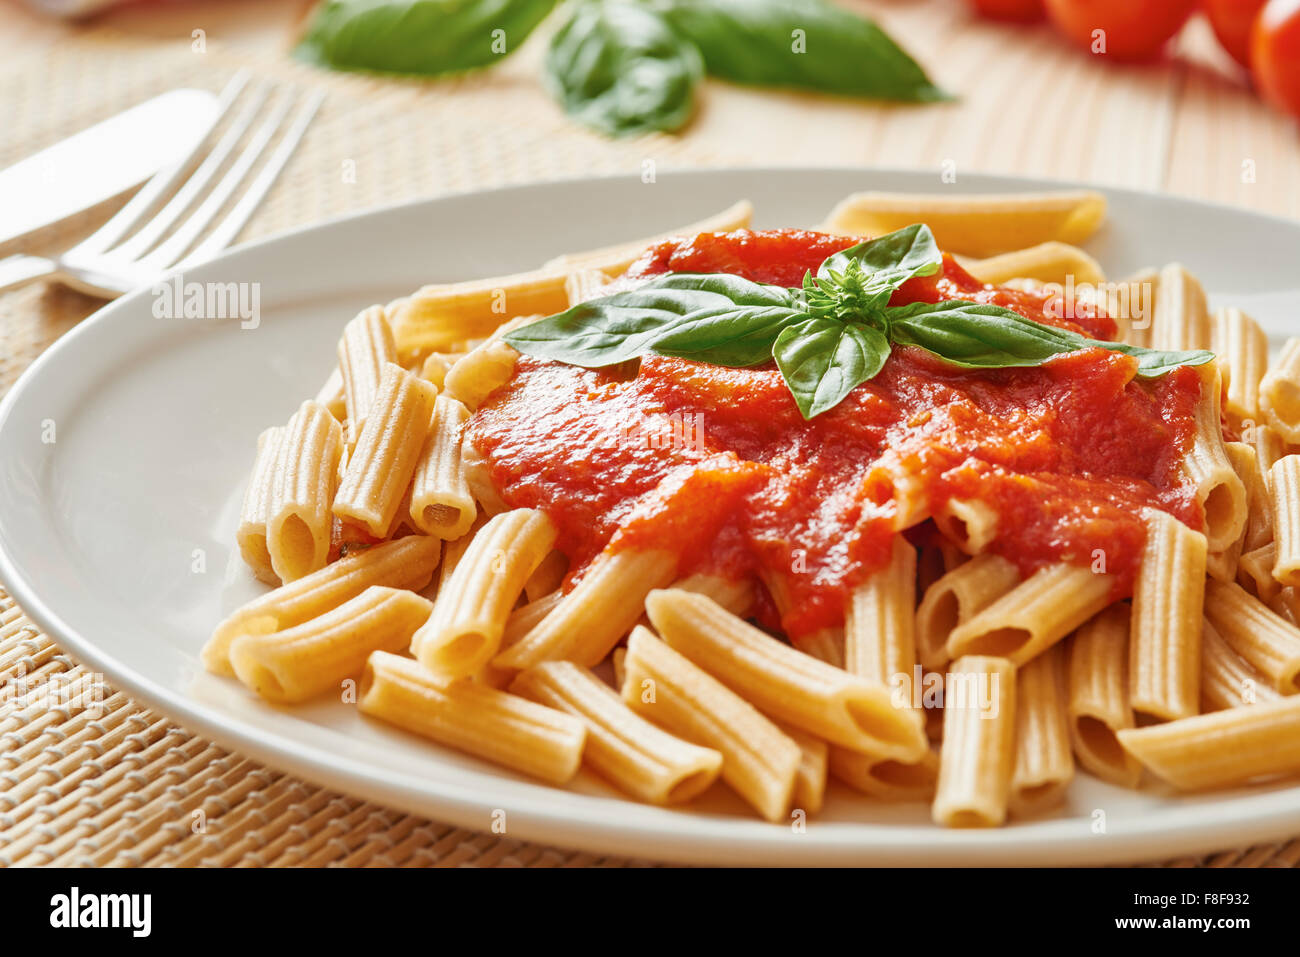 Wheat pasta with tomato sauce on white plate surrounded by basil and tomato on wooden table Stock Photo